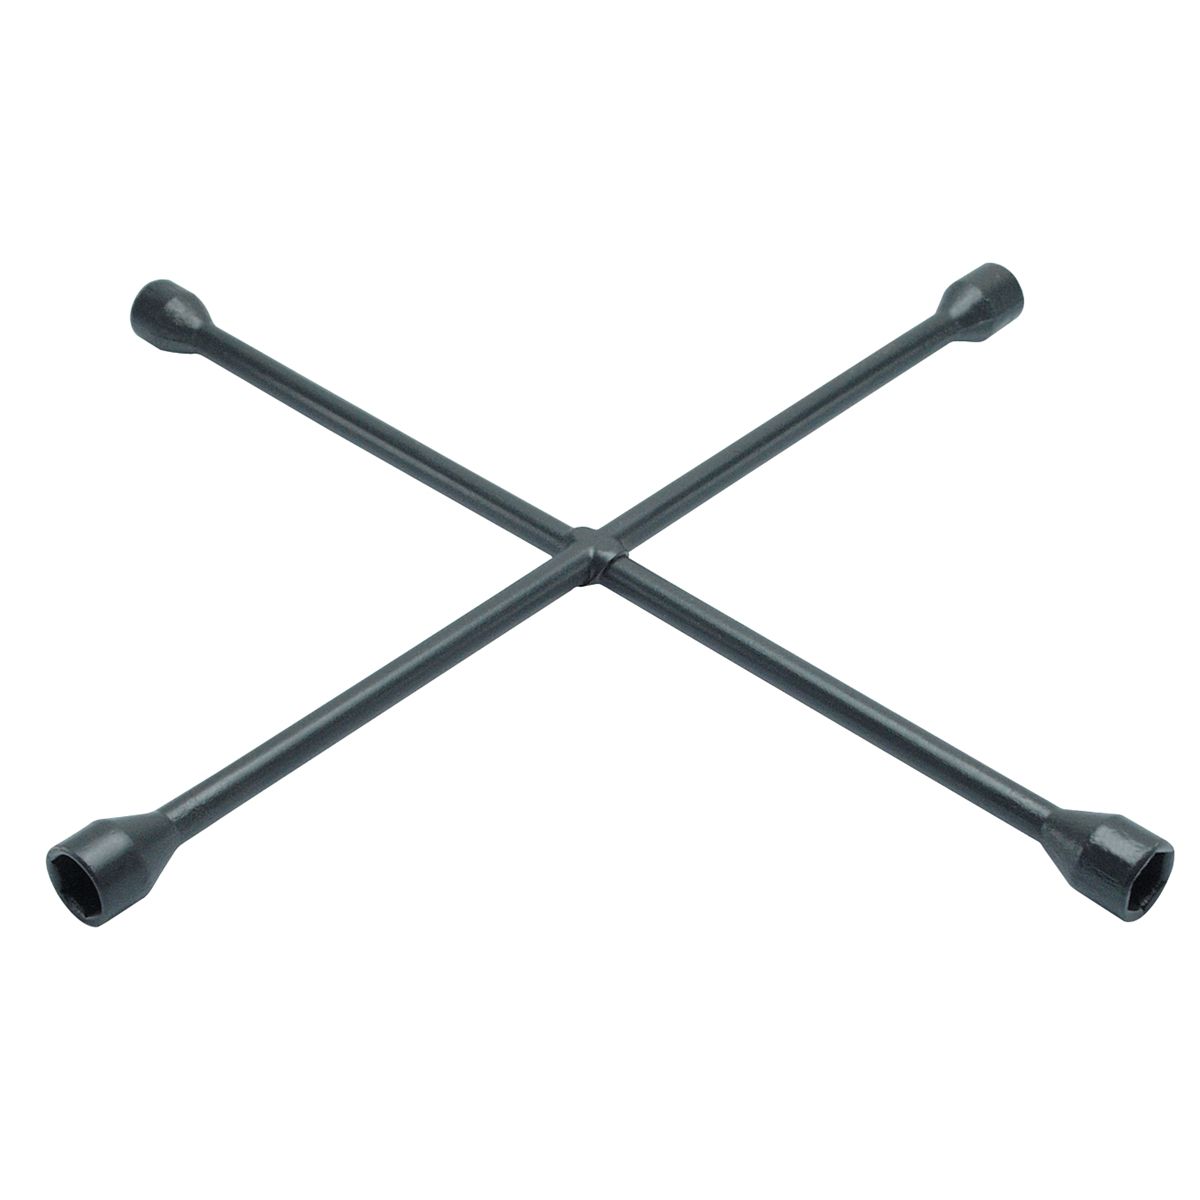 Four-Way Standard Light Truck Lug Wrench T90 - 25 In